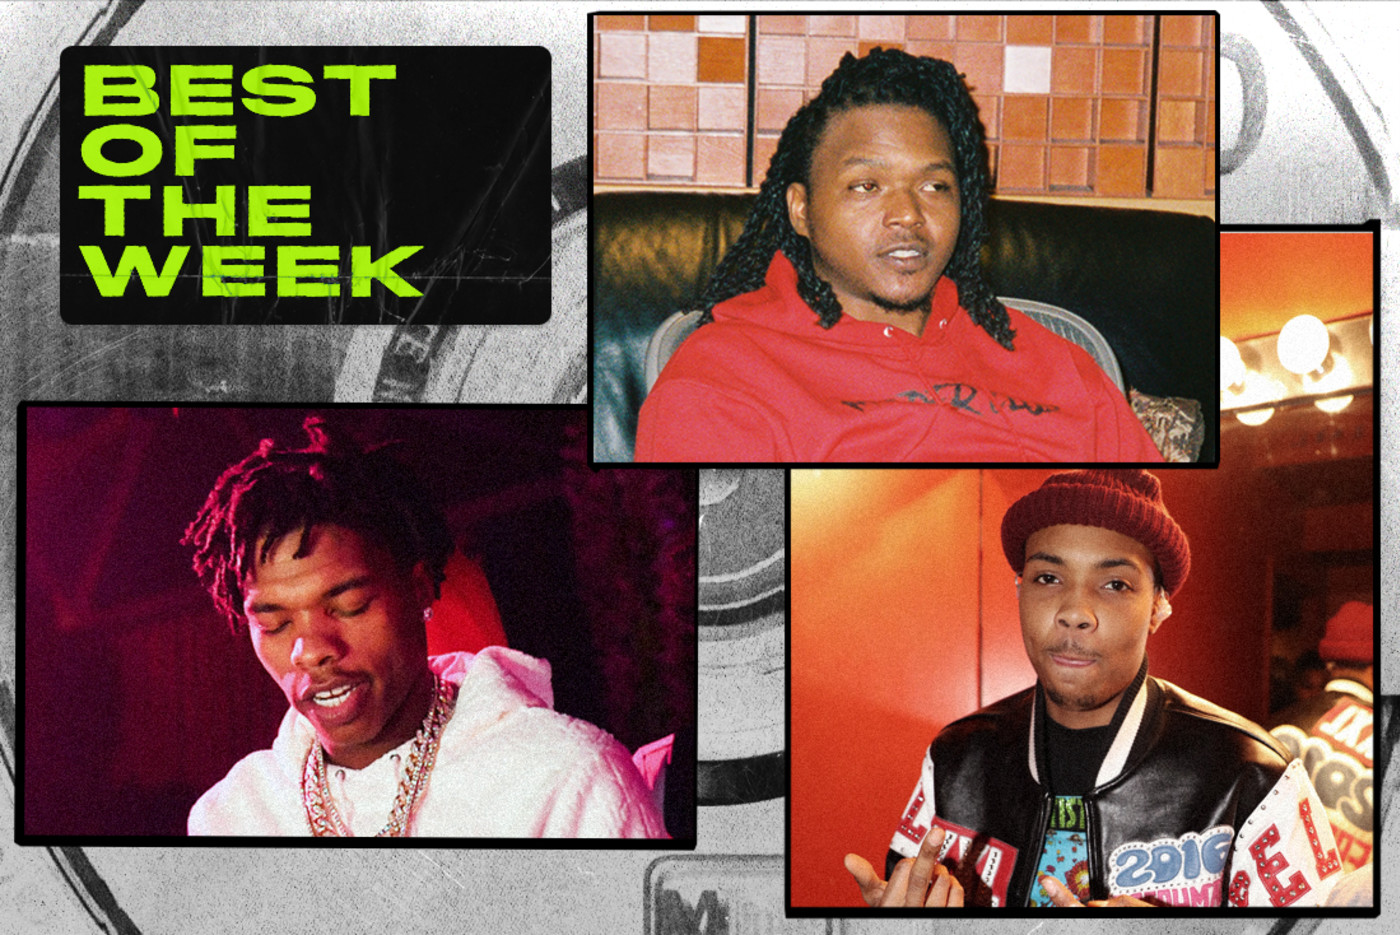 Best New Music This Week Lil Baby Young Nudy G Herbo And More Complex Scared i wasn't gon' make it home some nights wondering am i gon' be a homicide kill you quick and find a side. lil baby young nudy g herbo